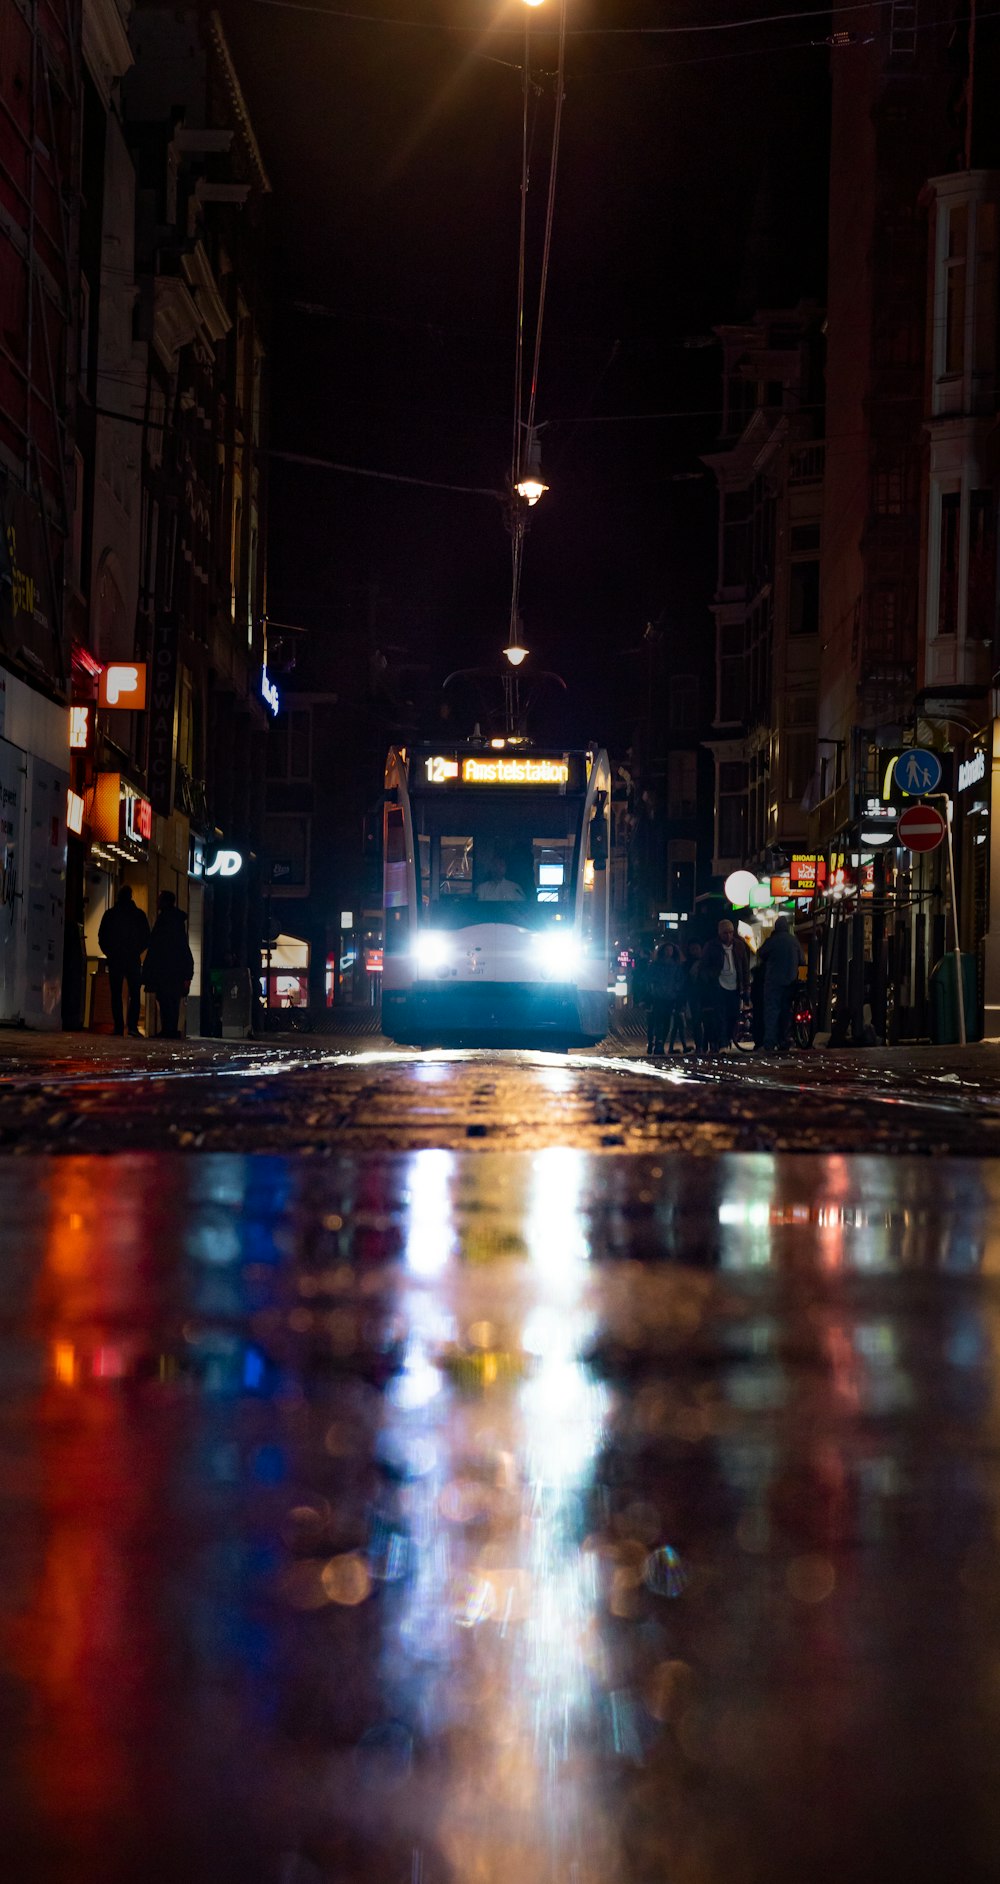 a city street at night with a bus on the street